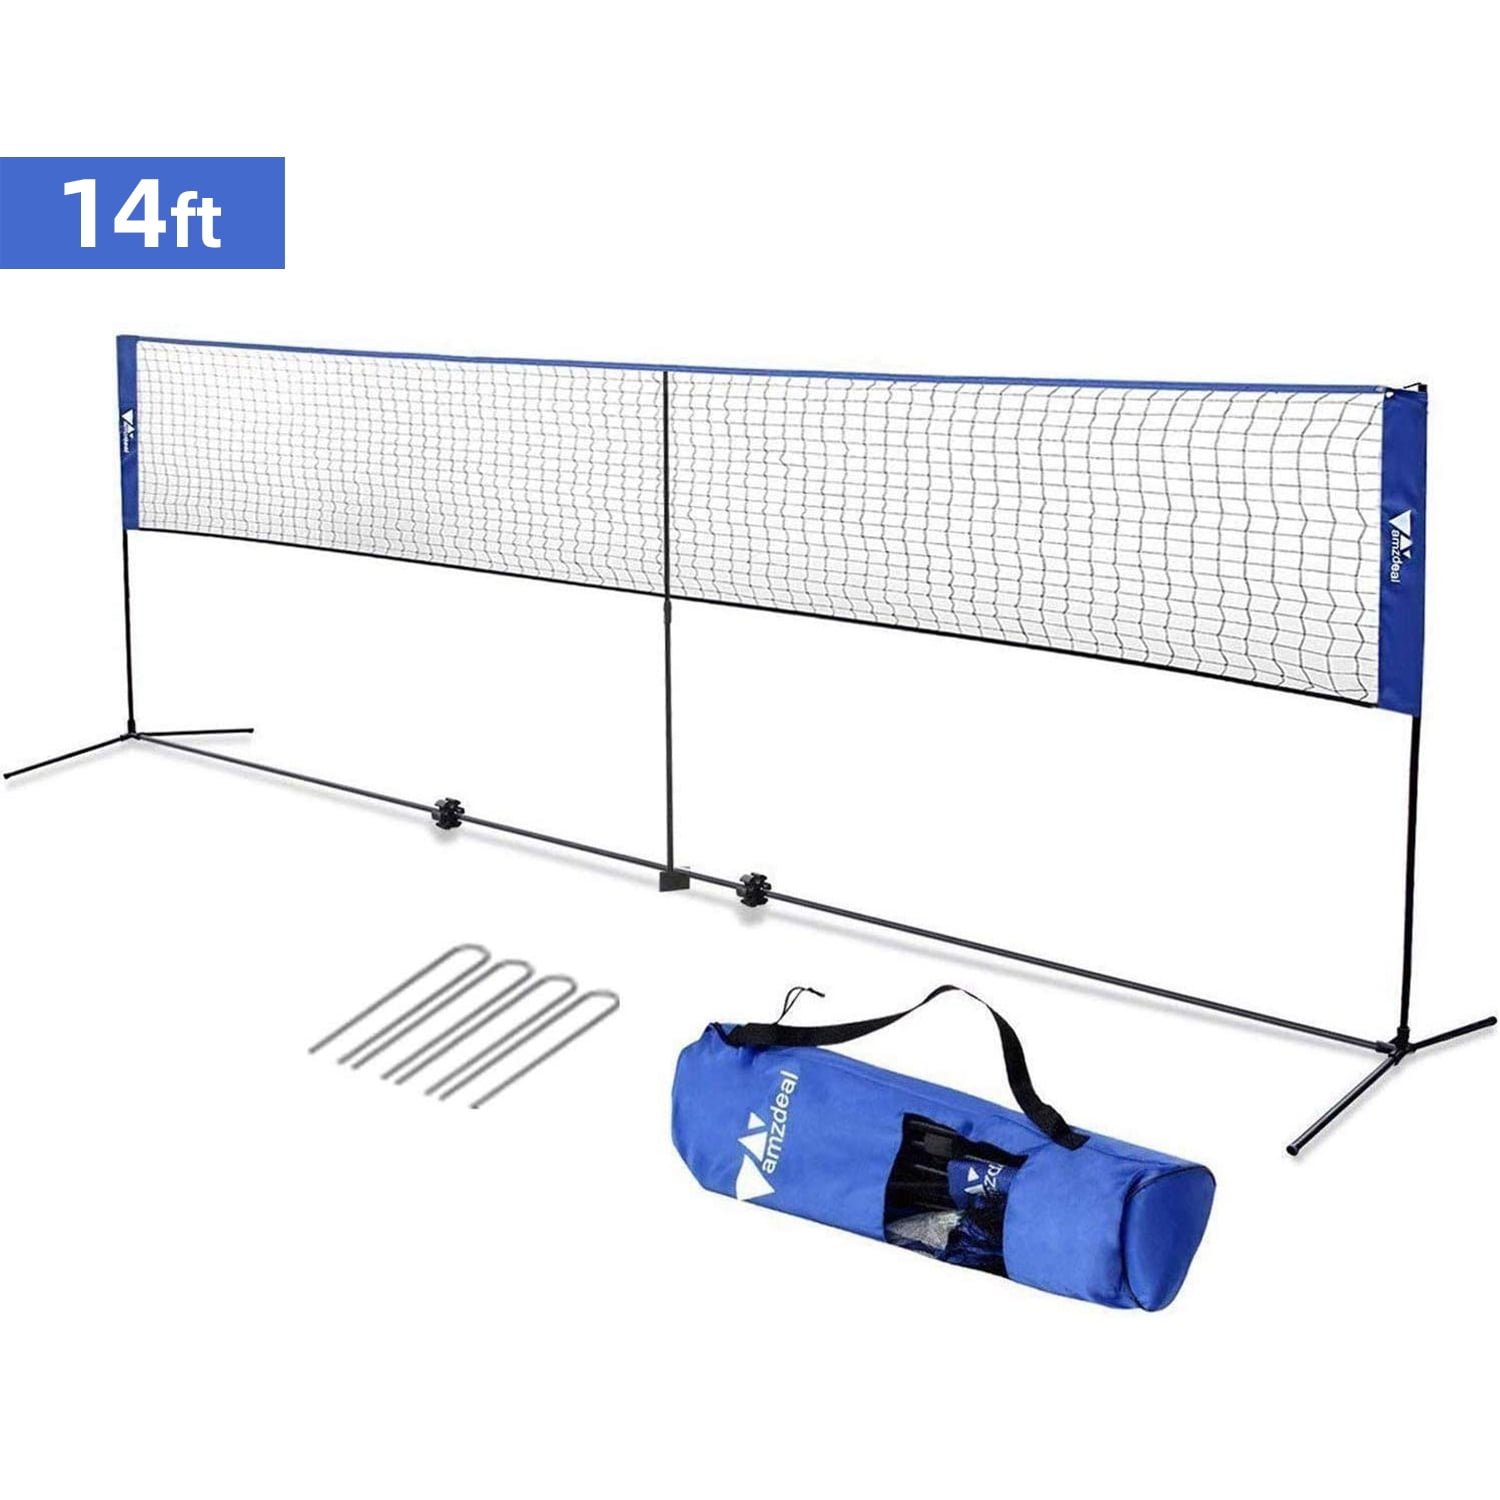 Volleyball Net Standard Size for Sports Training Practice and Fun Freeshipping 